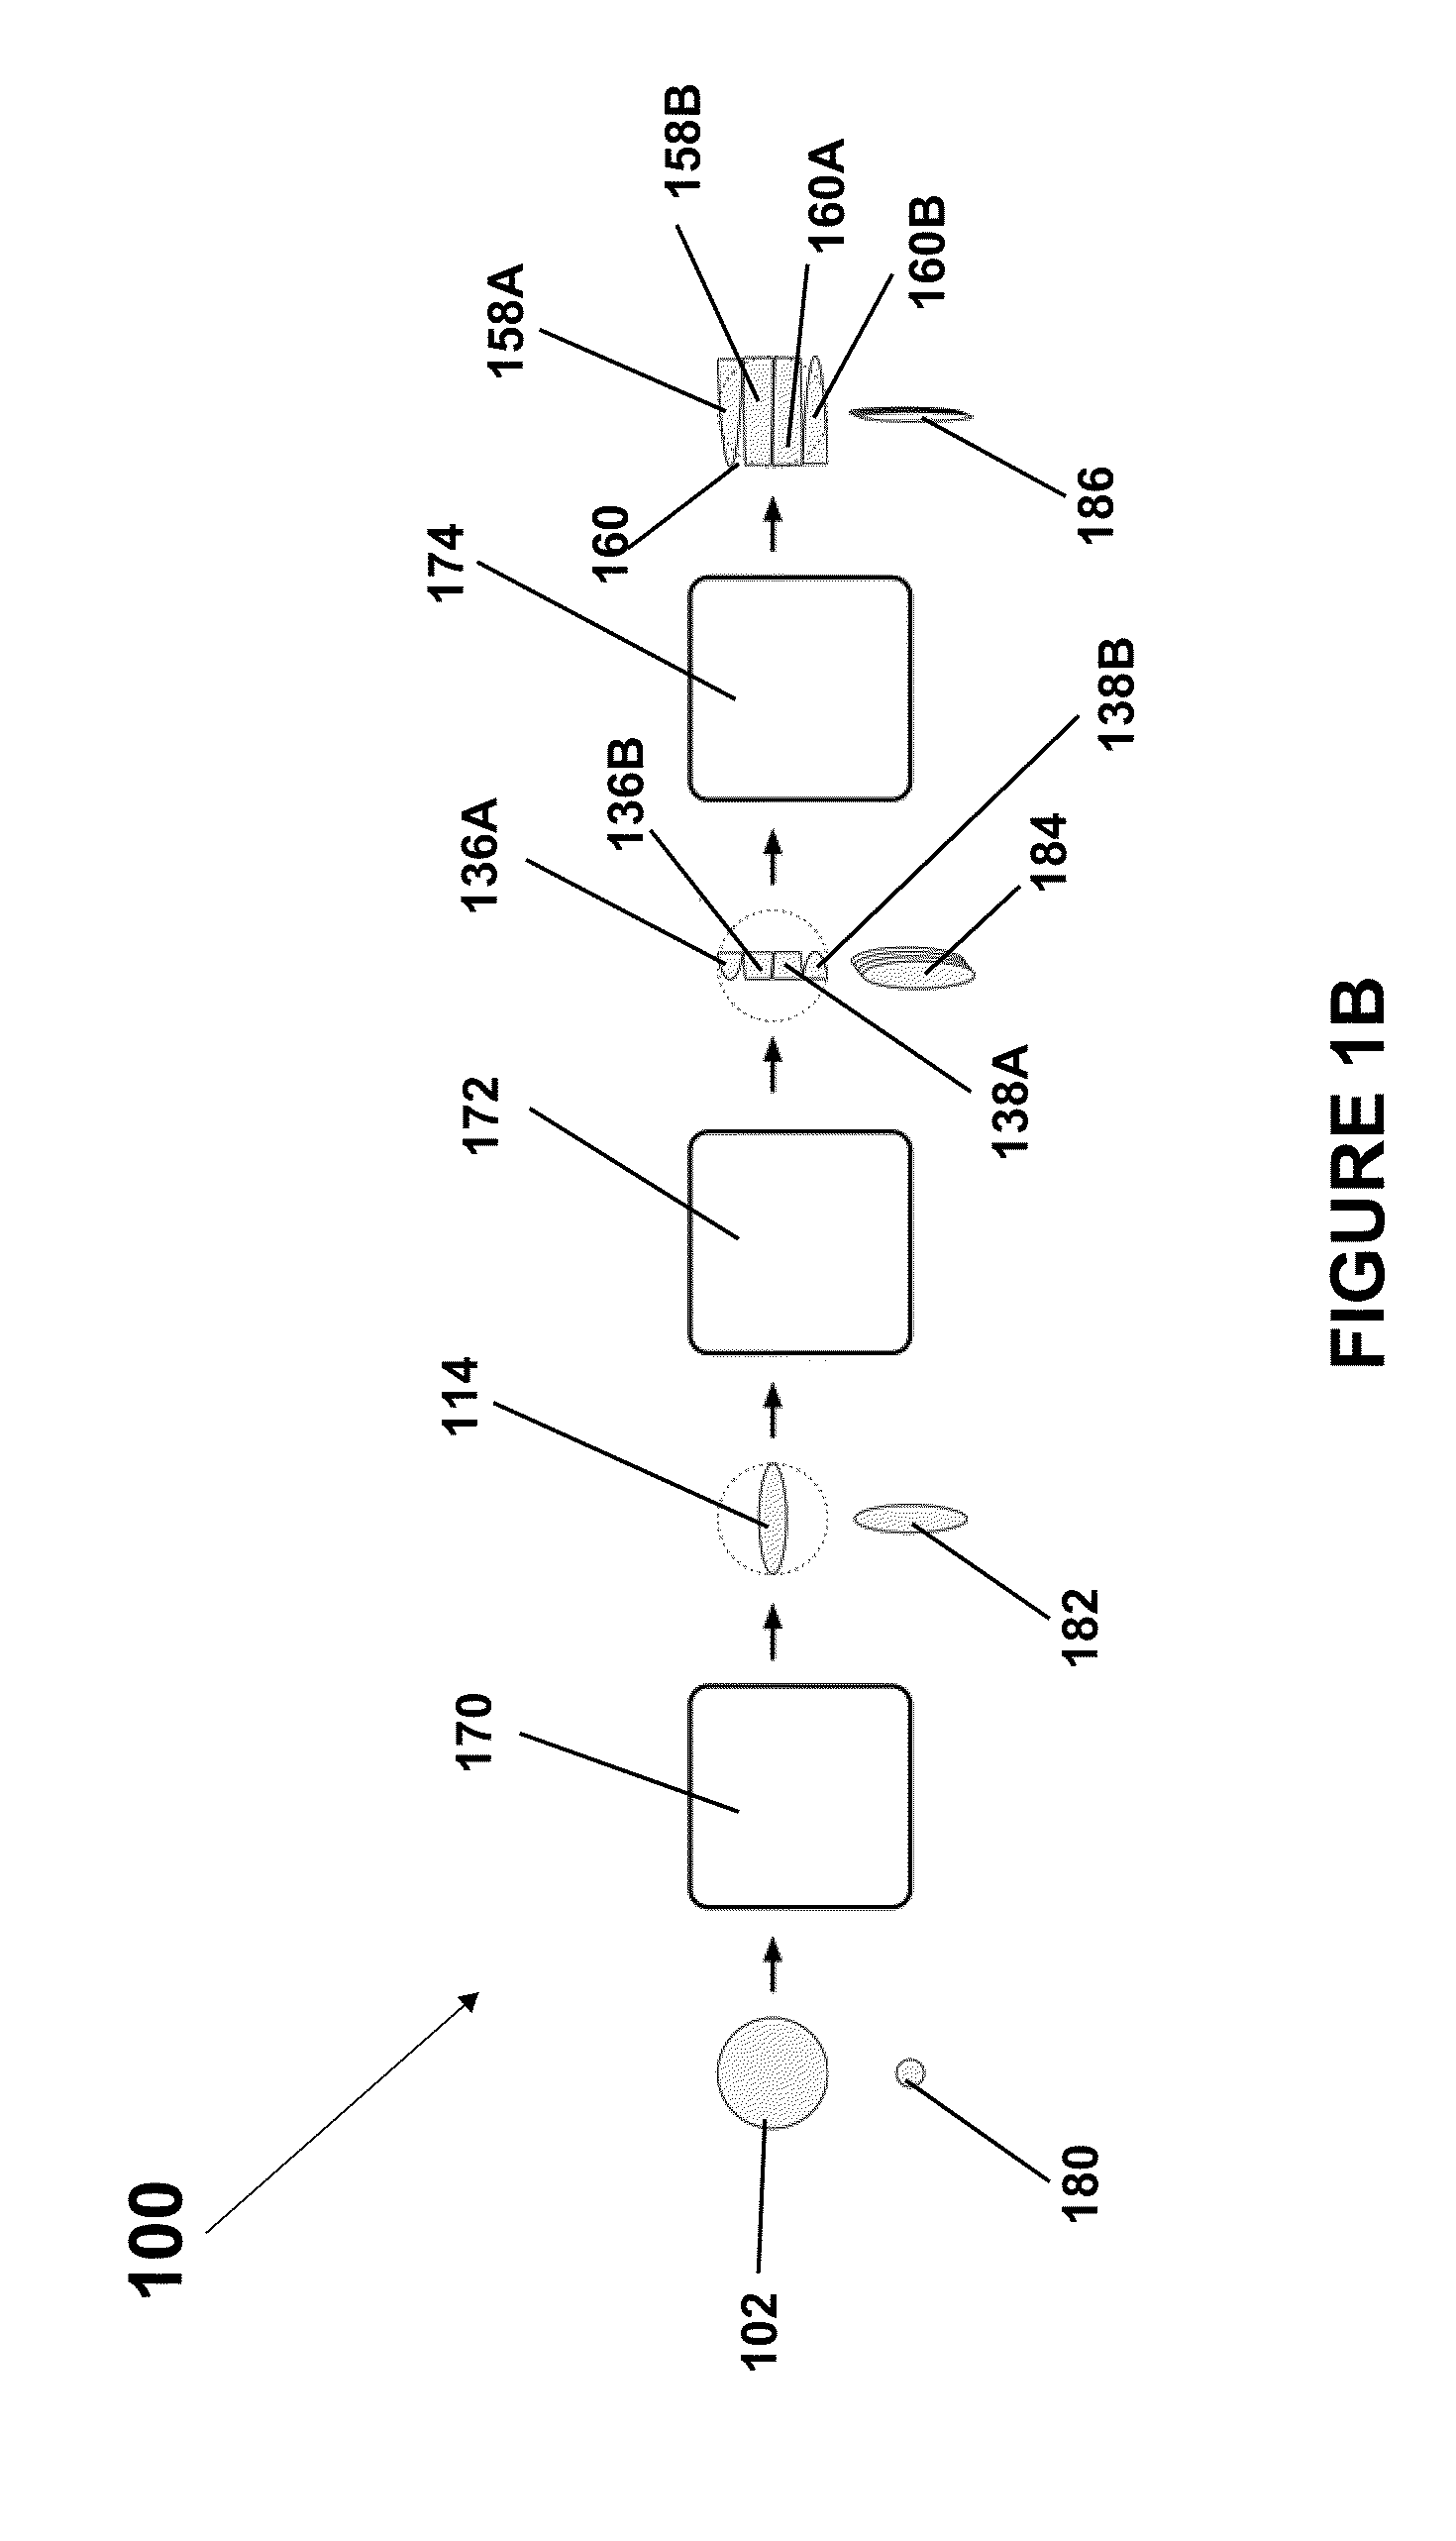 Optical slicer for improving the spectral resolution of a dispersive spectrograph